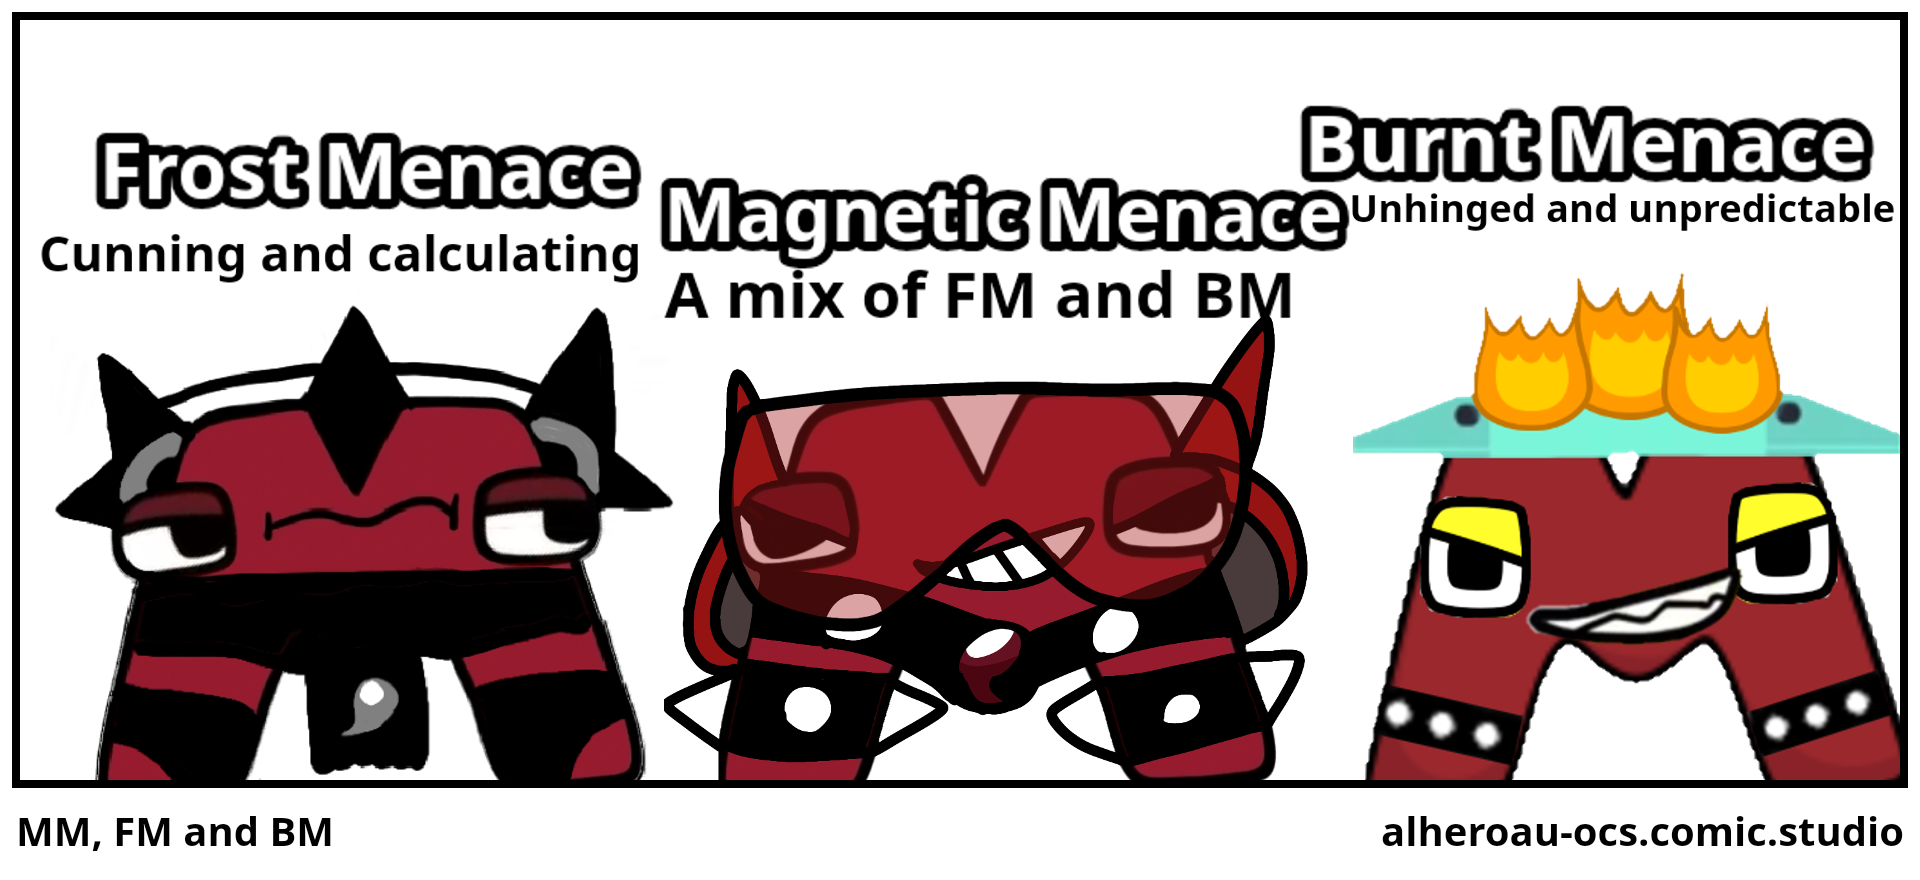 MM, FM and BM